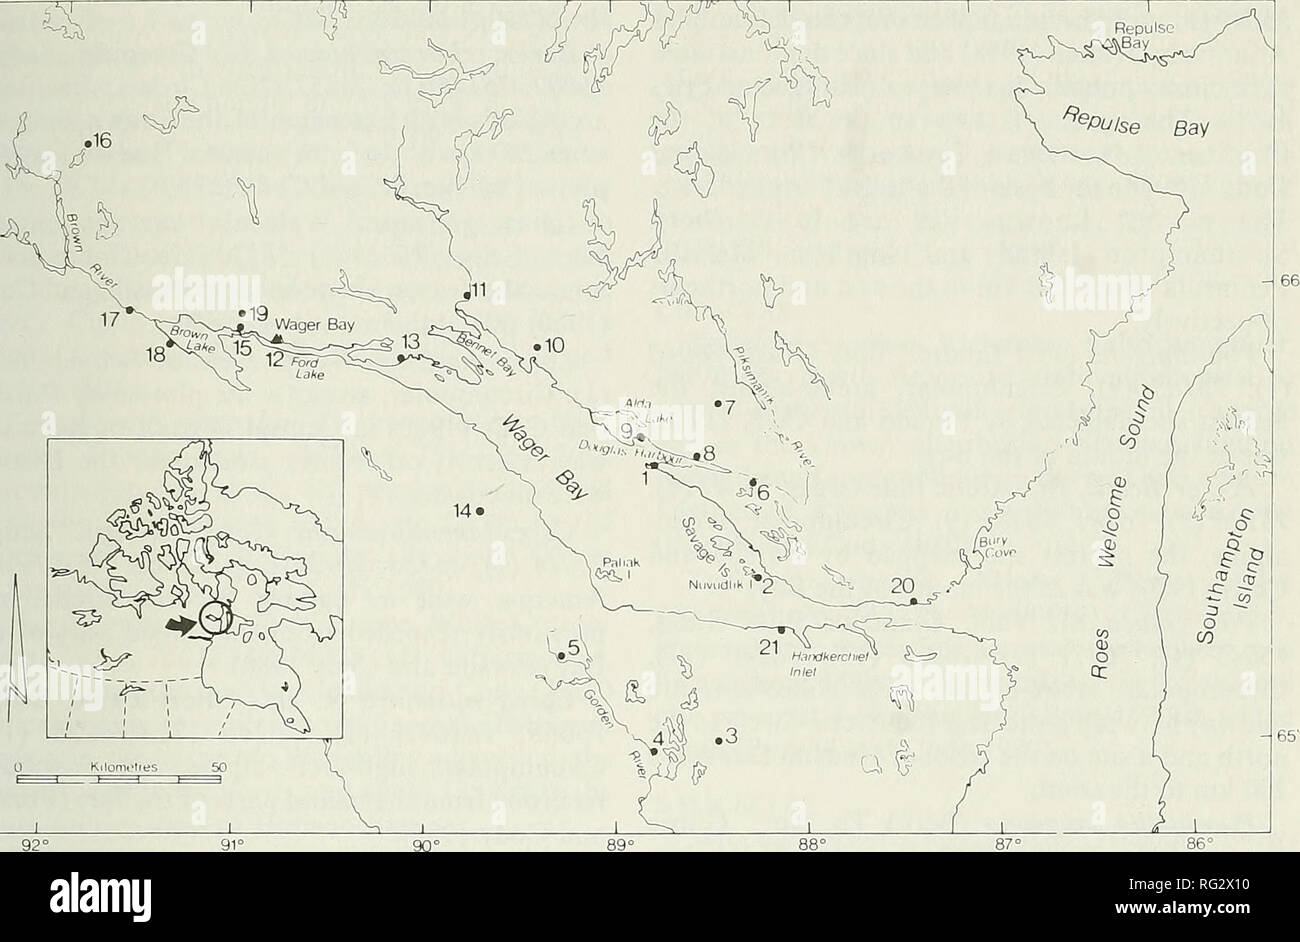 . The Canadian field-naturalist. 1989 Cody, Scotter, and Zoltai: Flora of Wager Bay 553. Figure 1. Locations of survey sites in the Wager Bay region, Northwest Territories. Inset locates region in northern Canada. Dryopteris fragrans (L.) Schott., Fragrant Shield Fern, 76729(2); 76177(9); 76226(12); 76244 (17); 76262 (21). Circumpolar, arctic-alpine; not previously known from the Wager Bay area (Porsild and Cody 1980). Equisetaceae Equisetum scirpoides Michx., Dwarf Scouring- rush, 76261 (20). Circumpolar, low-arctic; this collection from near the mouth of the Bay extends the known distributio Stock Photo